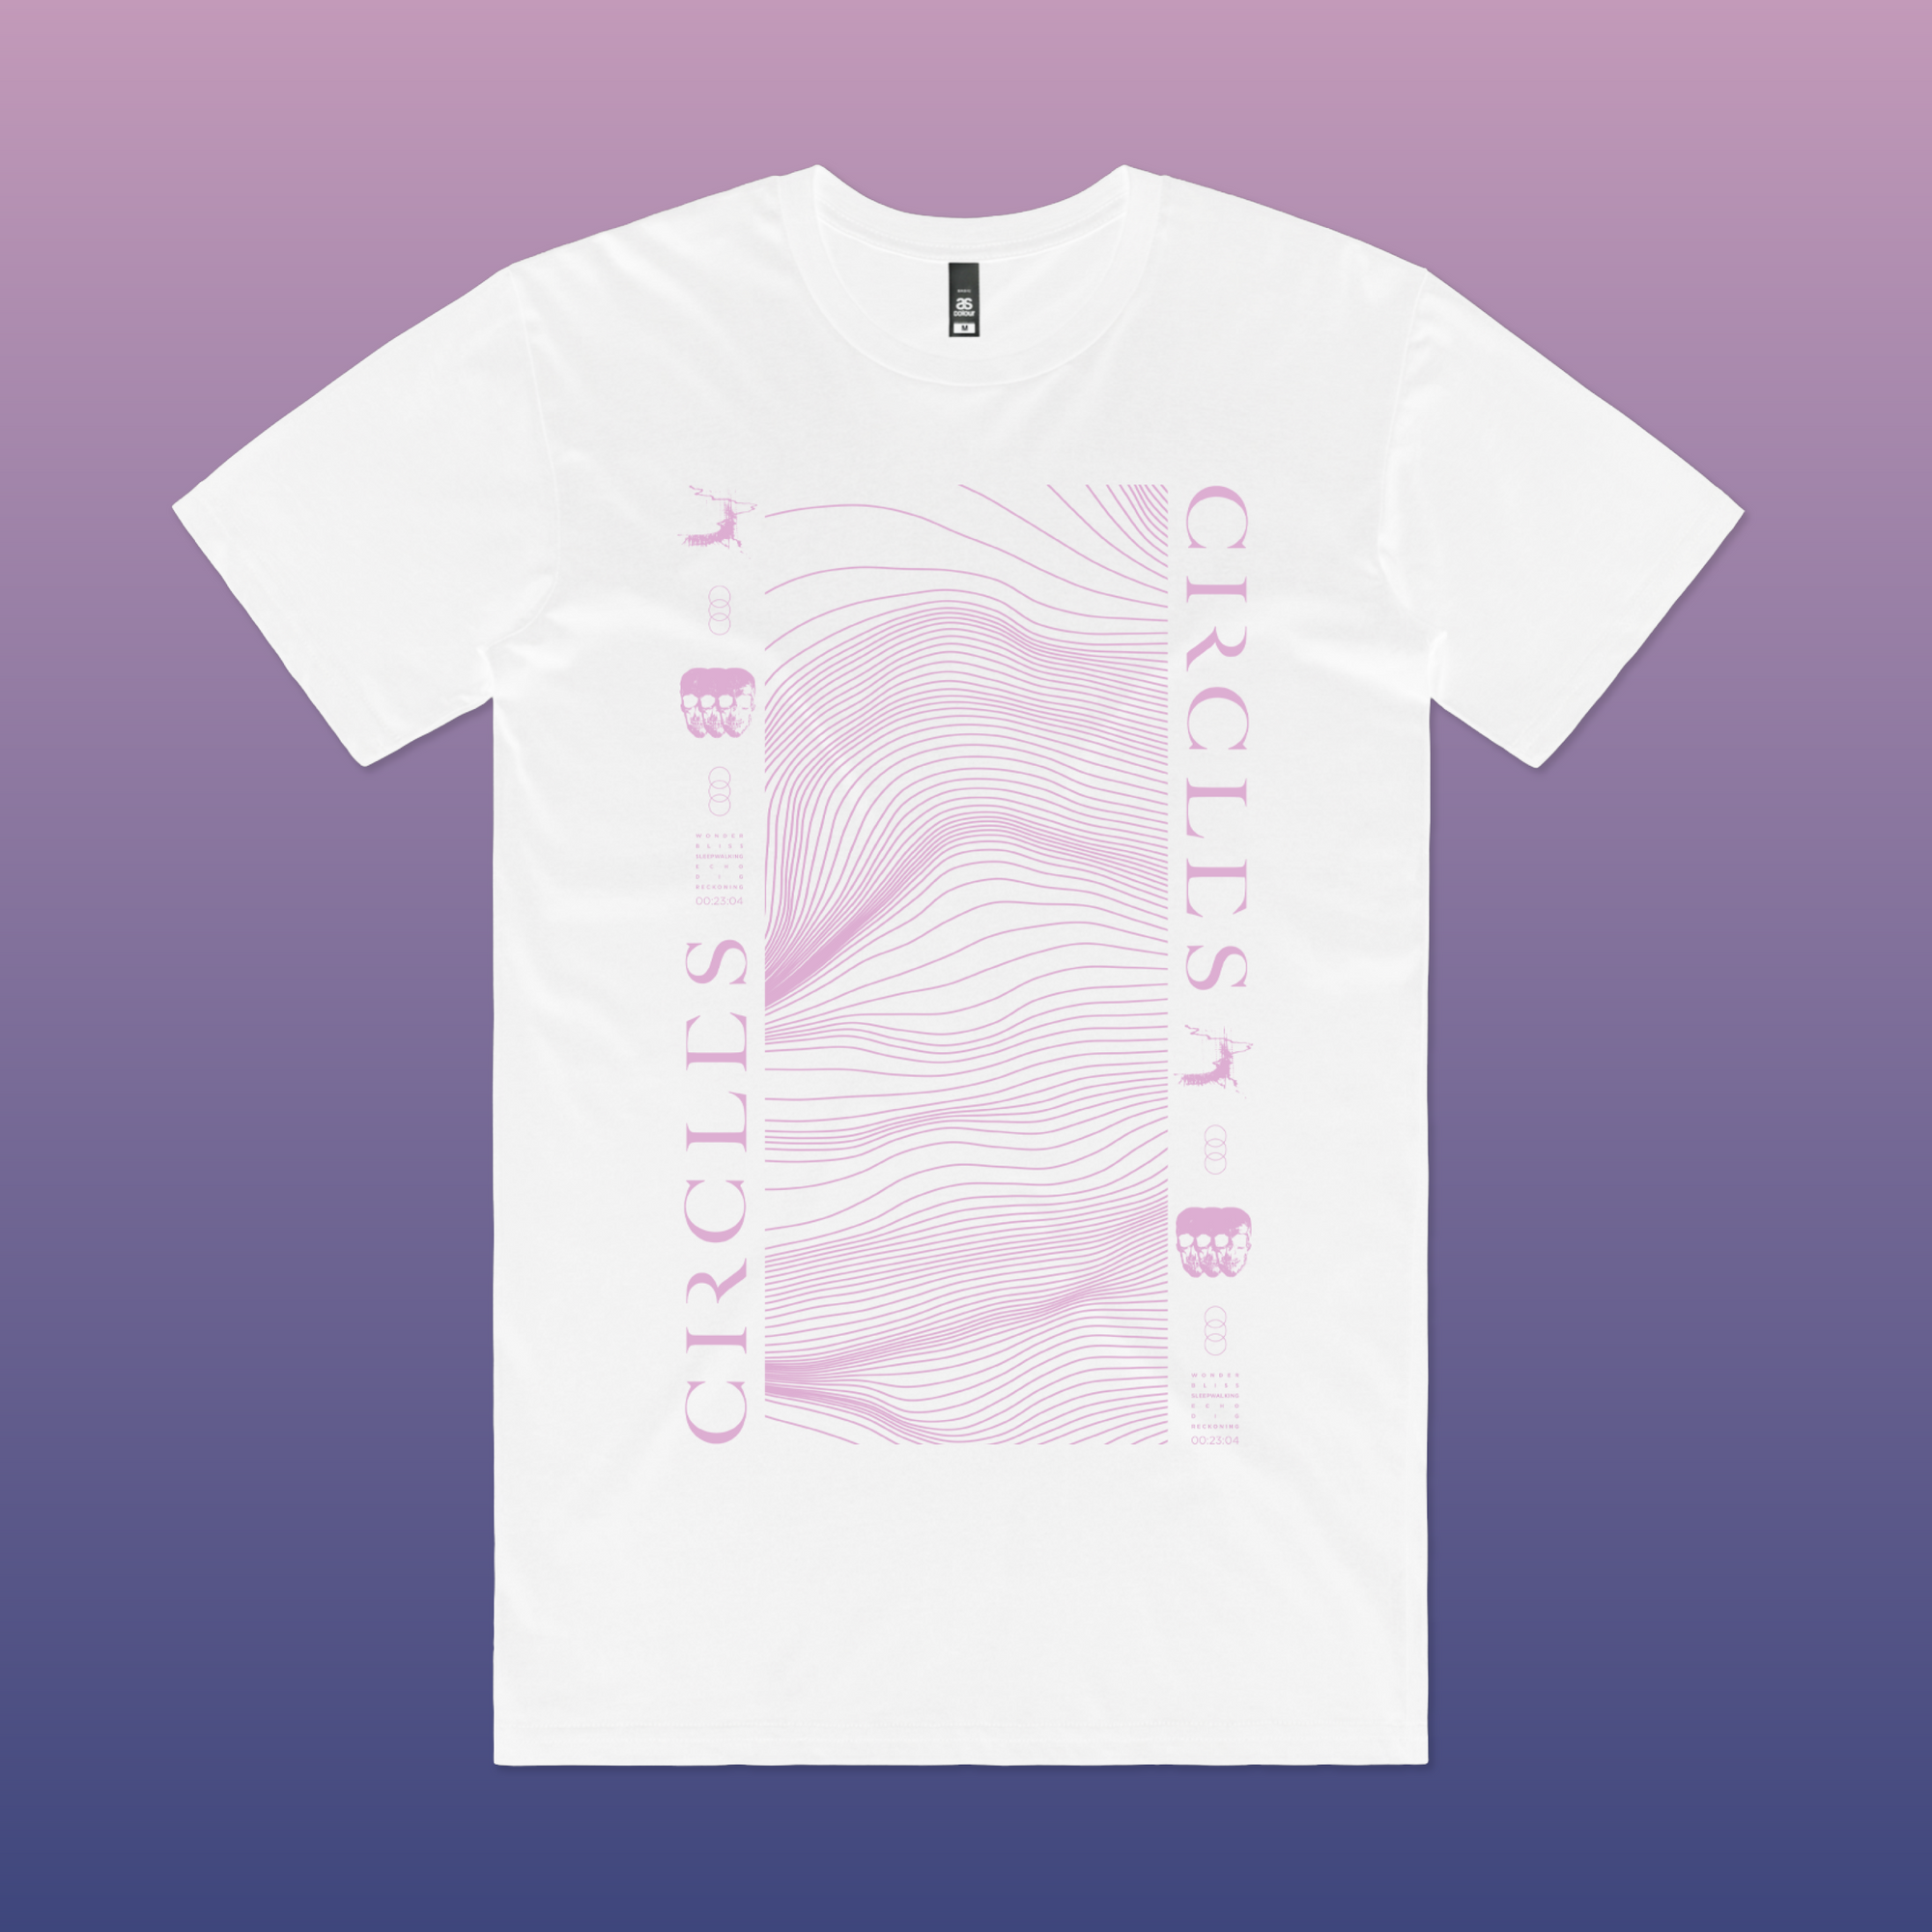 CIRCLES // THE STORIES WE ARE AFRAID OF | VOL.1 - SPECTRUM WHITE T-SHIRT